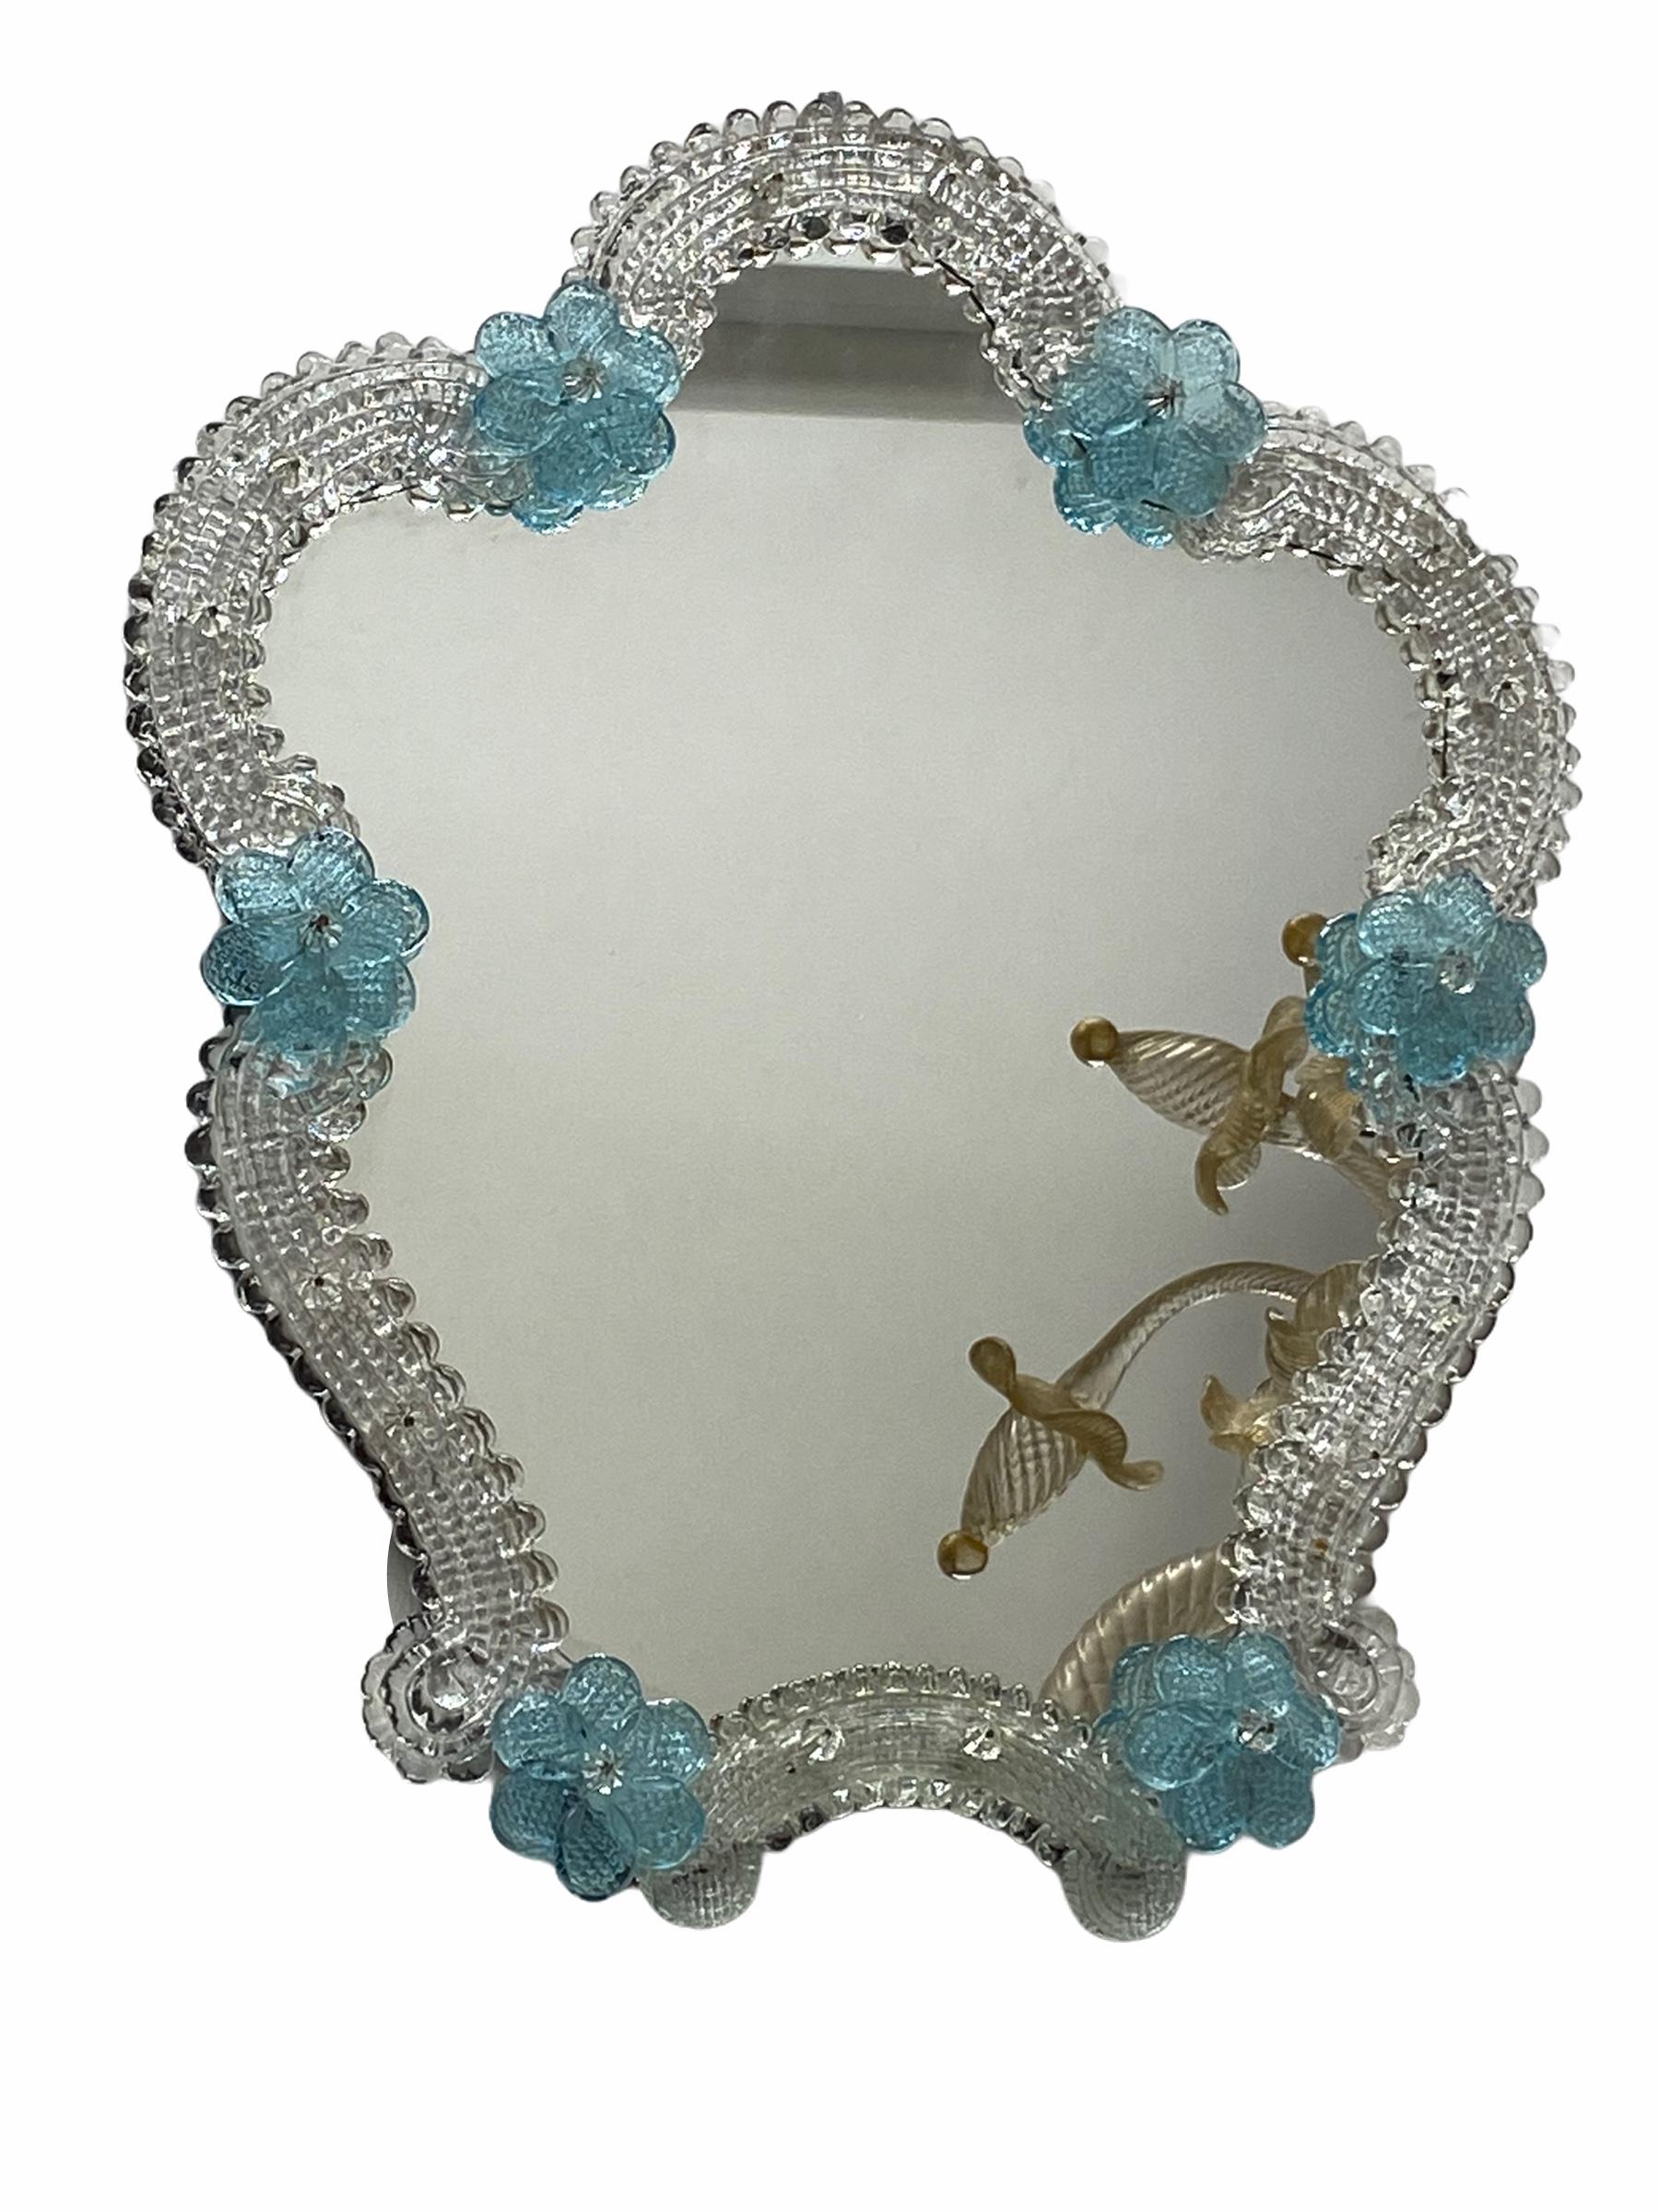 A gorgeous Murano glass vanity mirror surrounded with handmade light blue flowers. With minor signs of wear as expected with age and use. A nice addition to any dressing room.